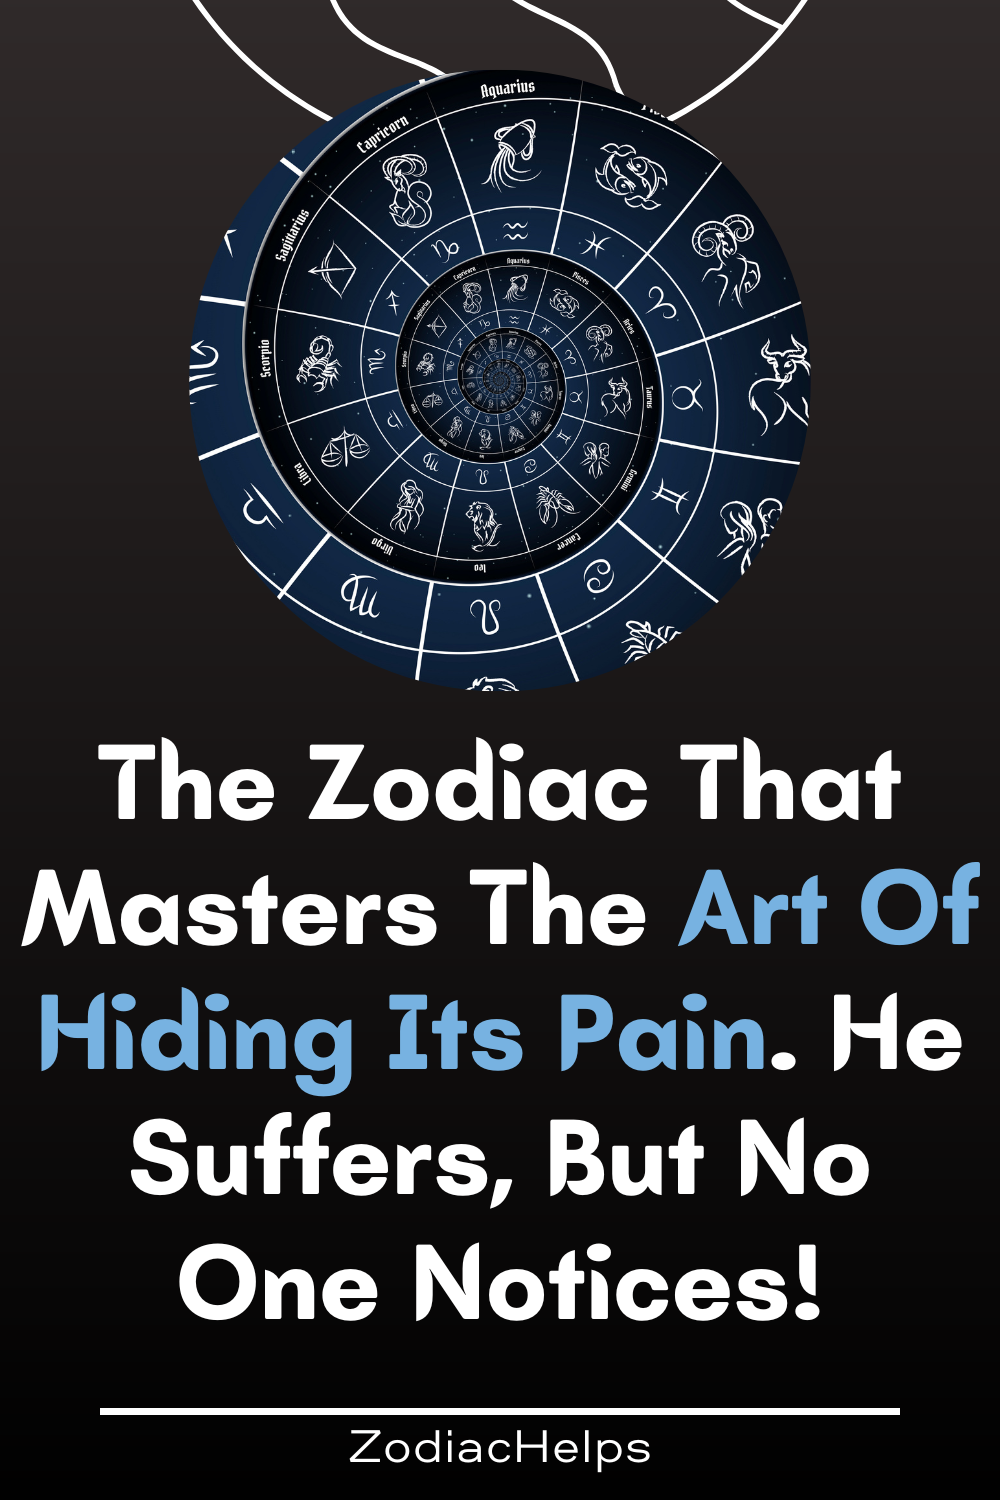 The Zodiac That Masters The Art Of Hiding Its Pain. He Suffers, But No One Notices!